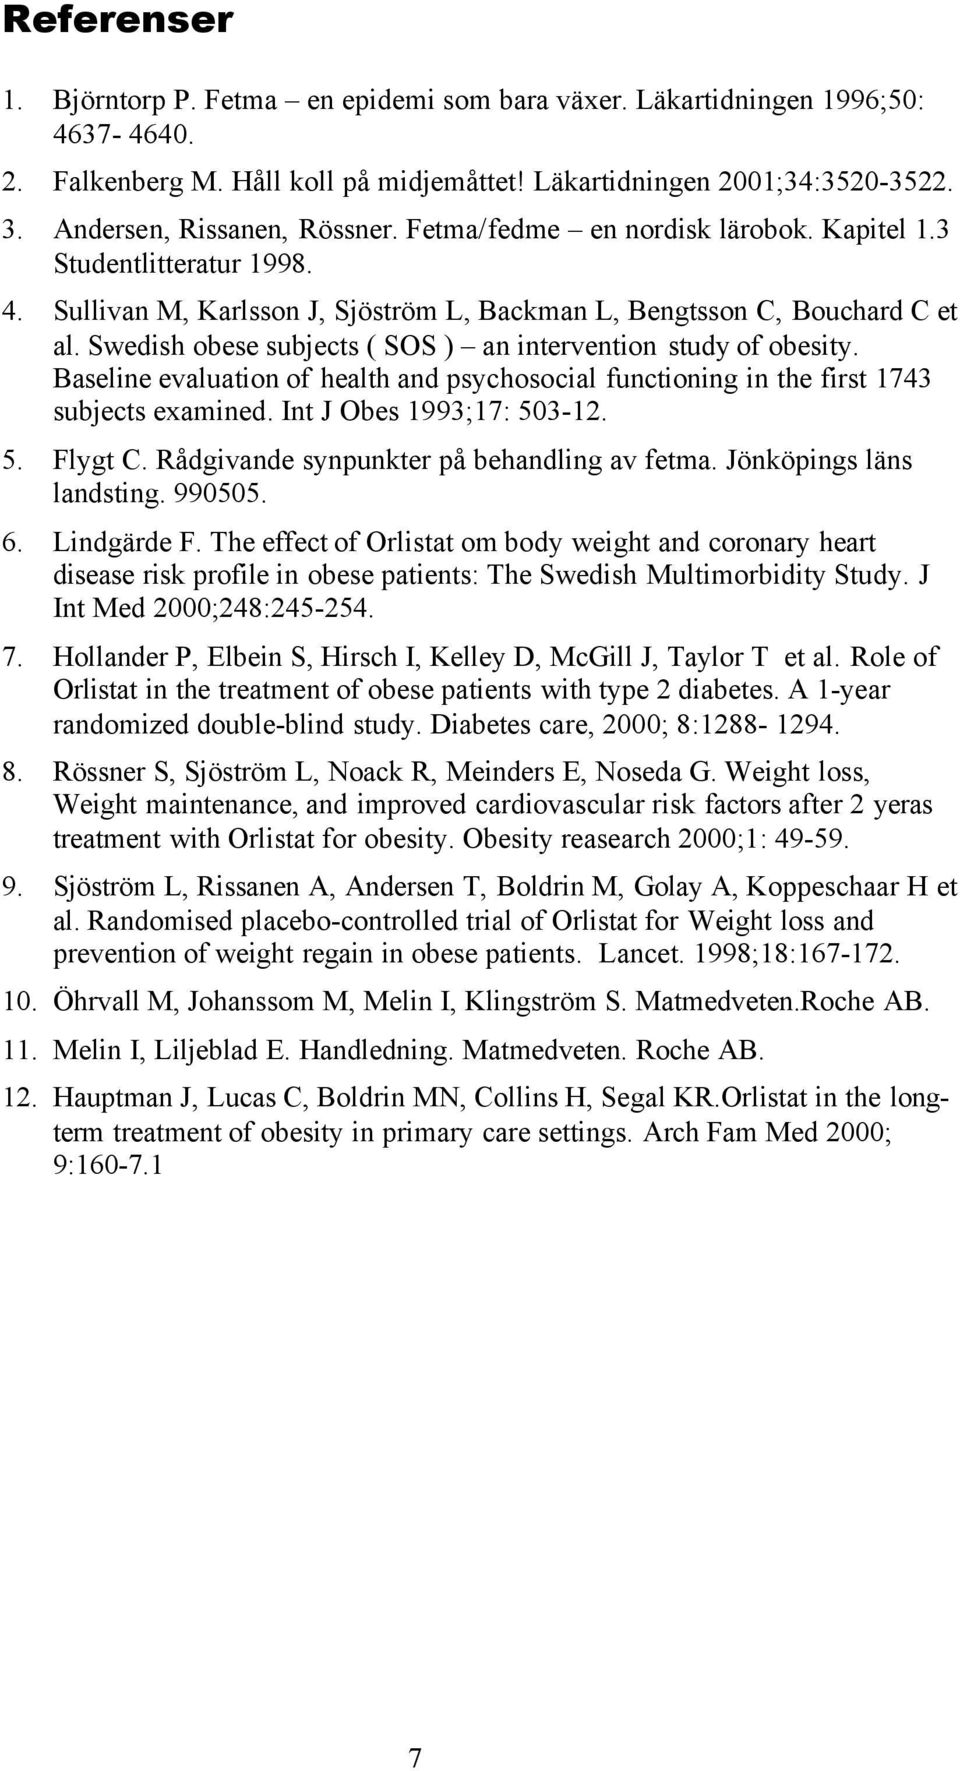 Swedish obese subjects ( SOS ) an intervention study of obesity. Baseline evaluation of health and psychosocial functioning in the first 1743 subjects examined. Int J Obes 1993;17: 503-12. 5. Flygt C.